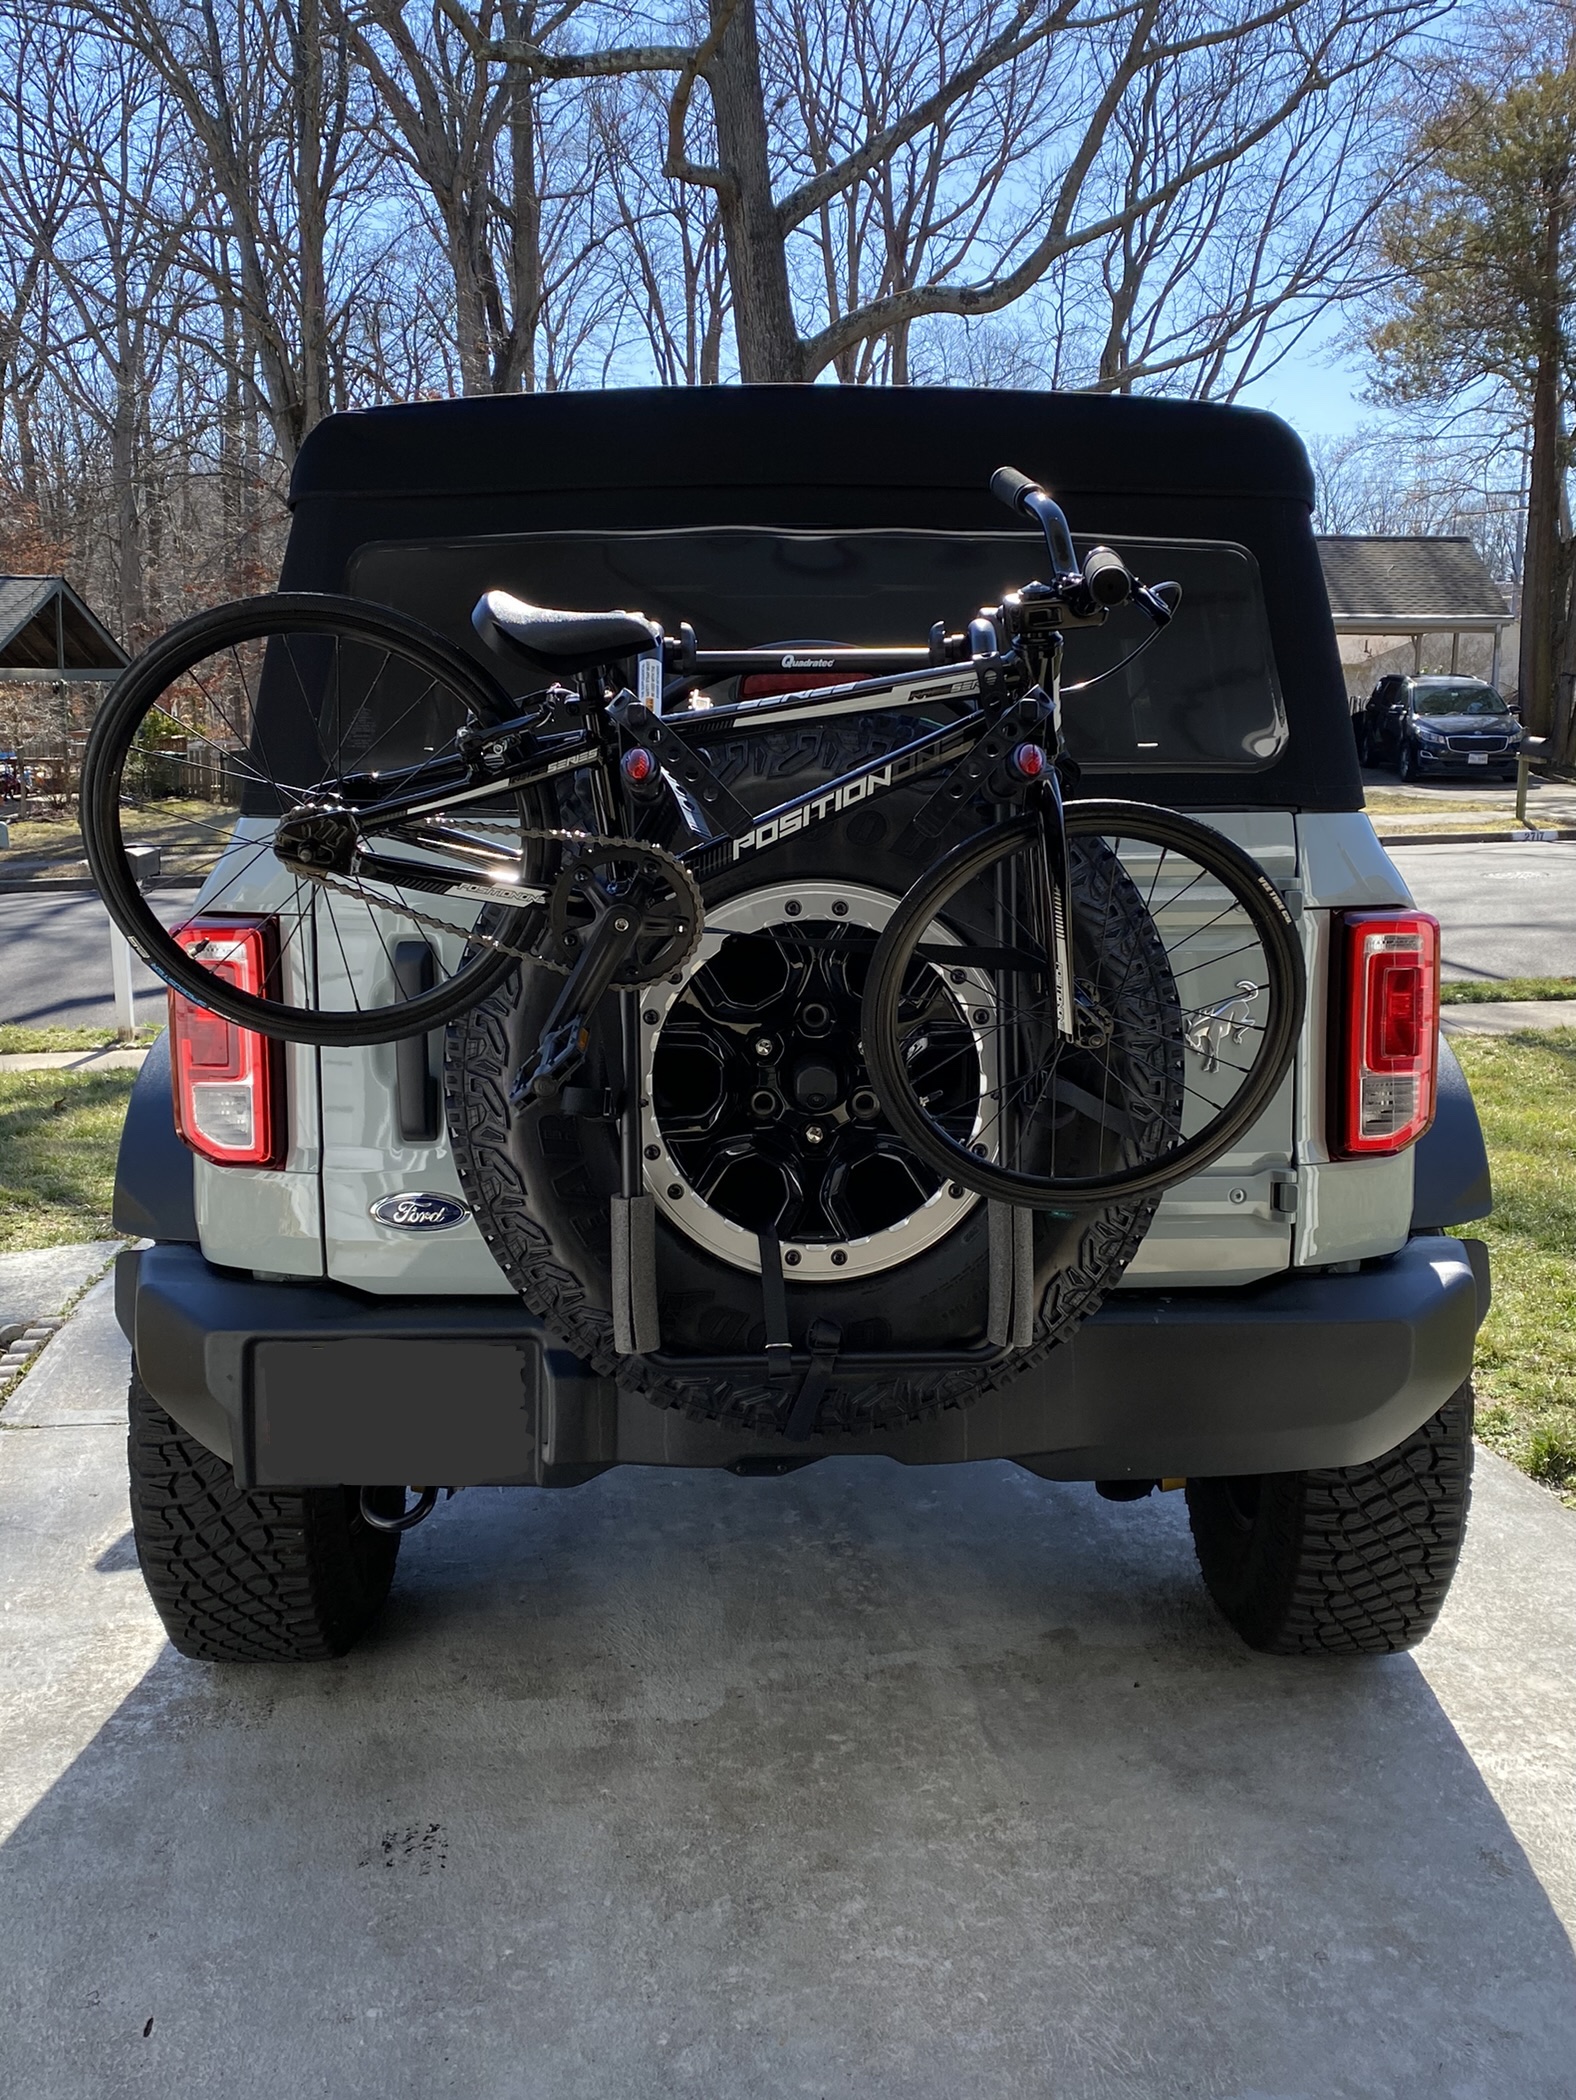 Ford Bronco Bike Rack that clears without an extension? 4A11C38C-1015-4B54-883F-D1FC135CA4B7